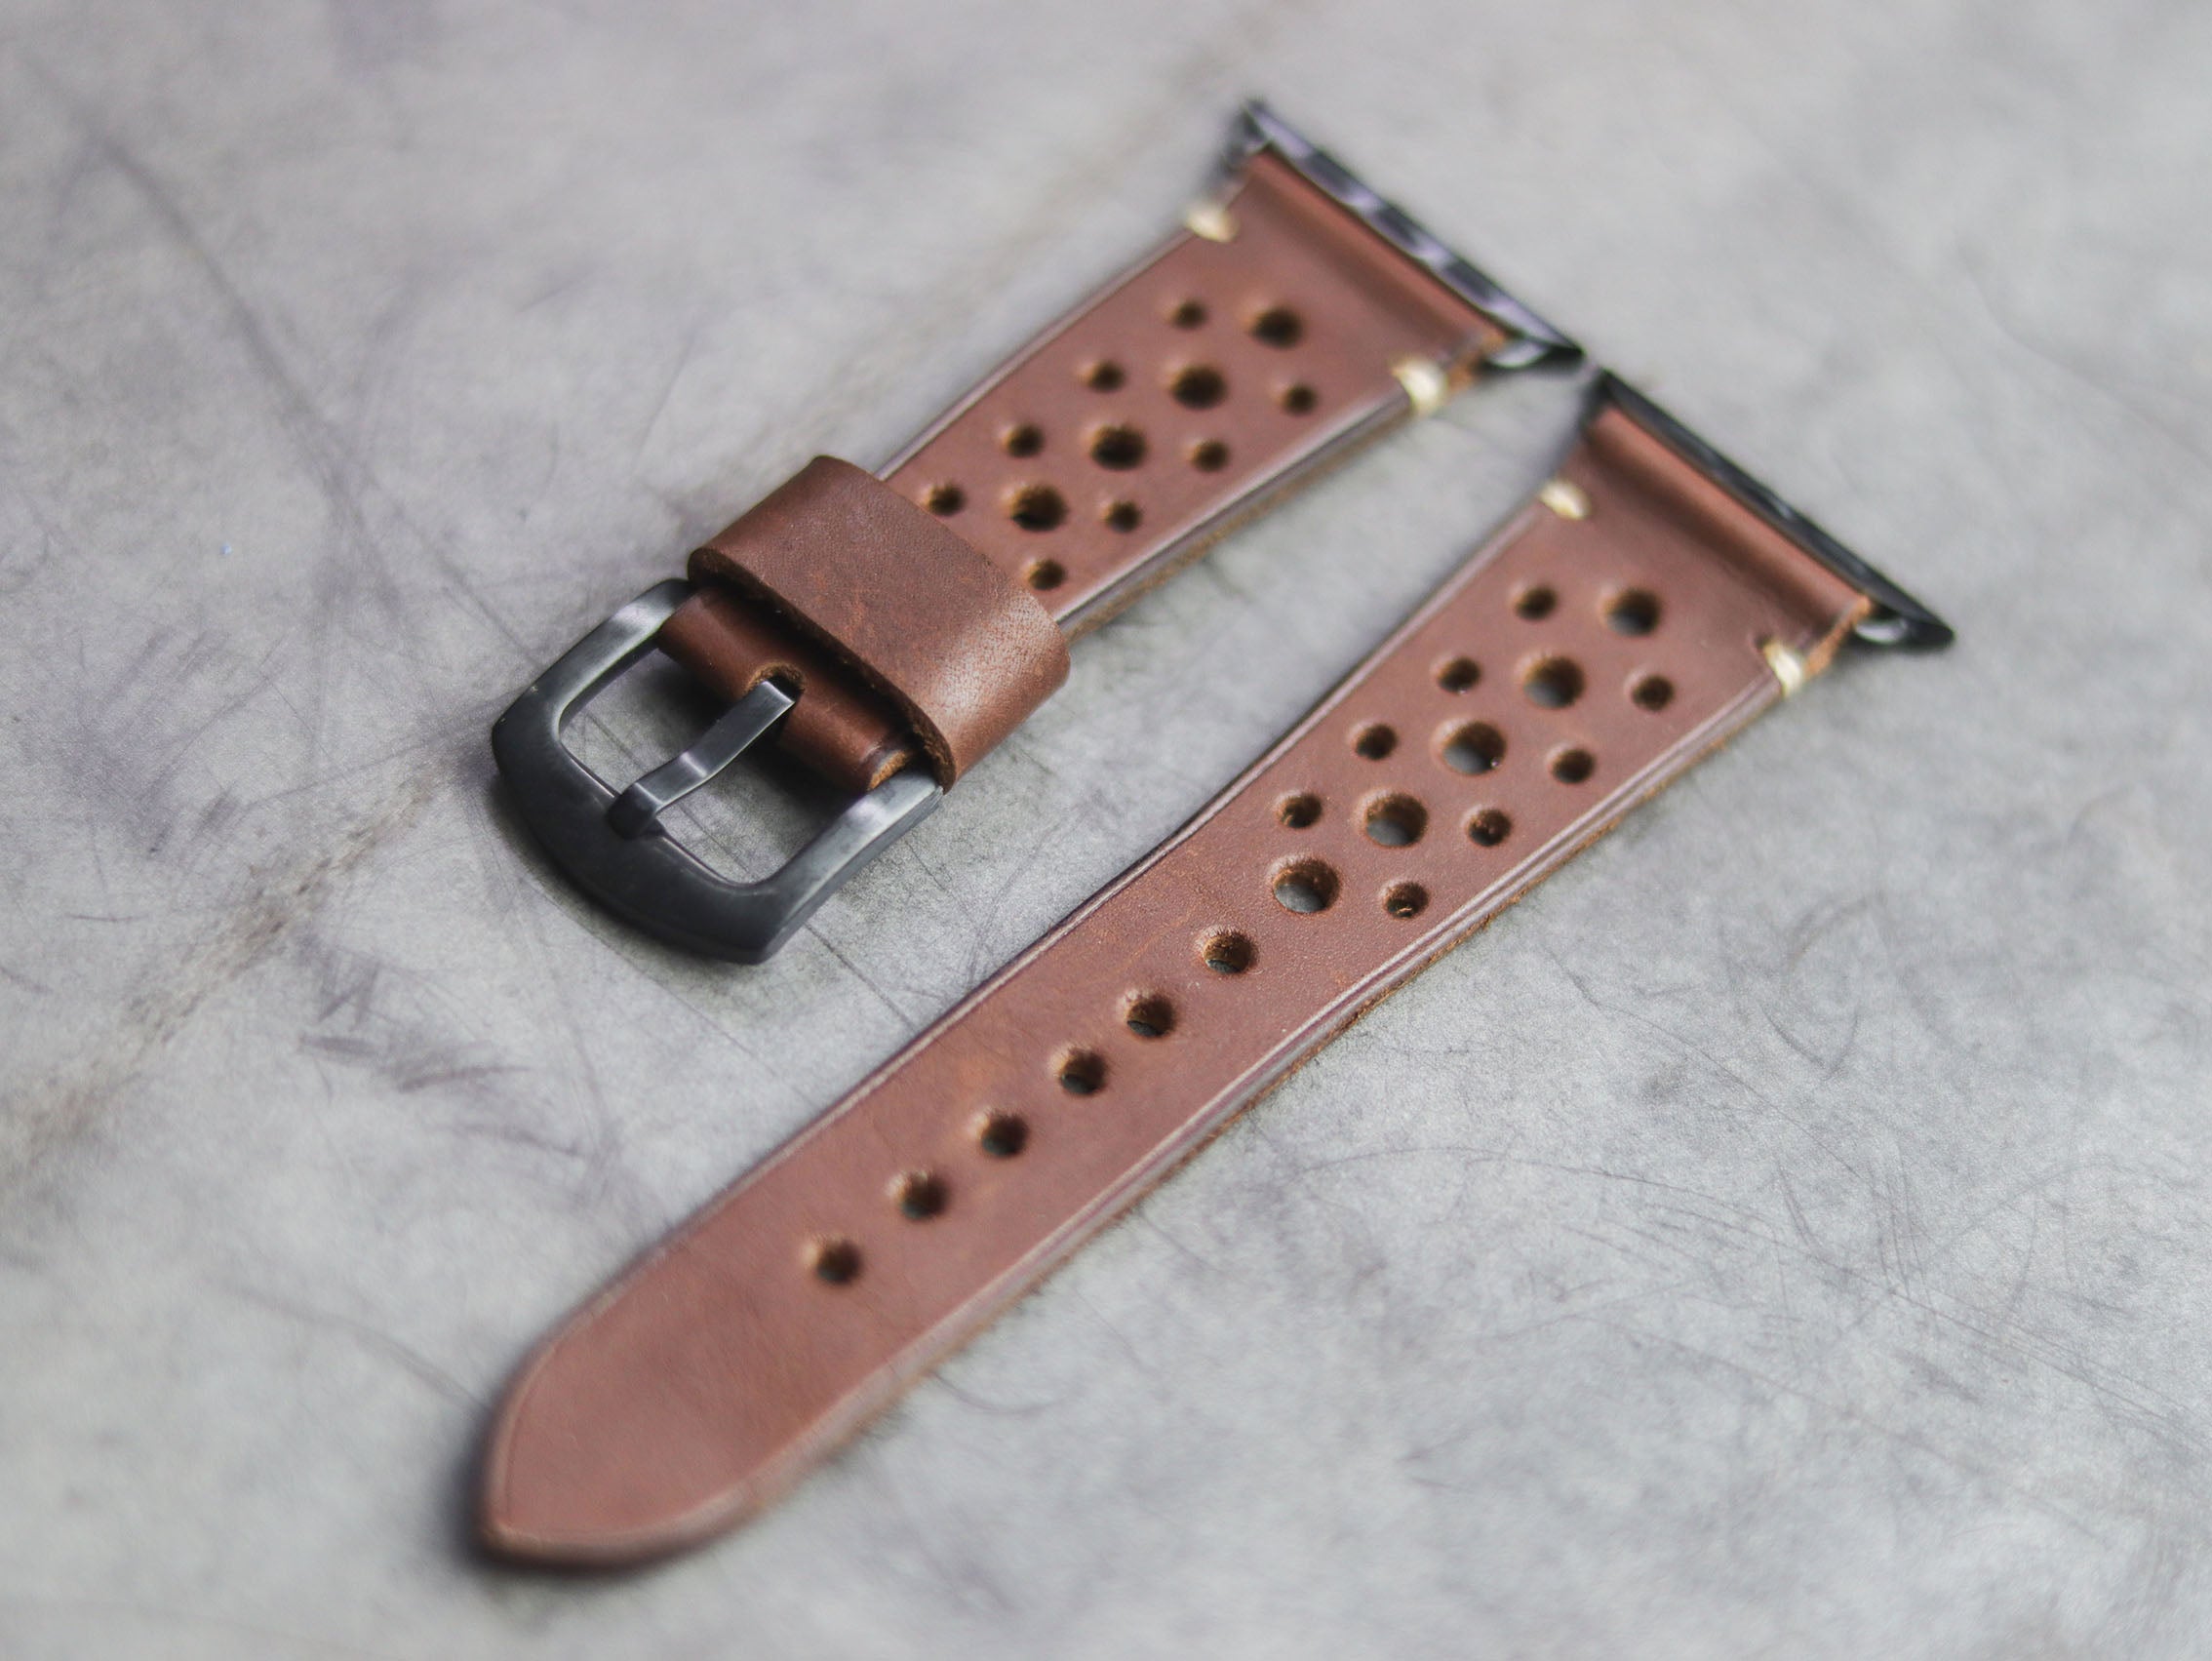 CHESTNUT BROWN RALLY HAND-CRAFTED APPLE WATCH STRAPS